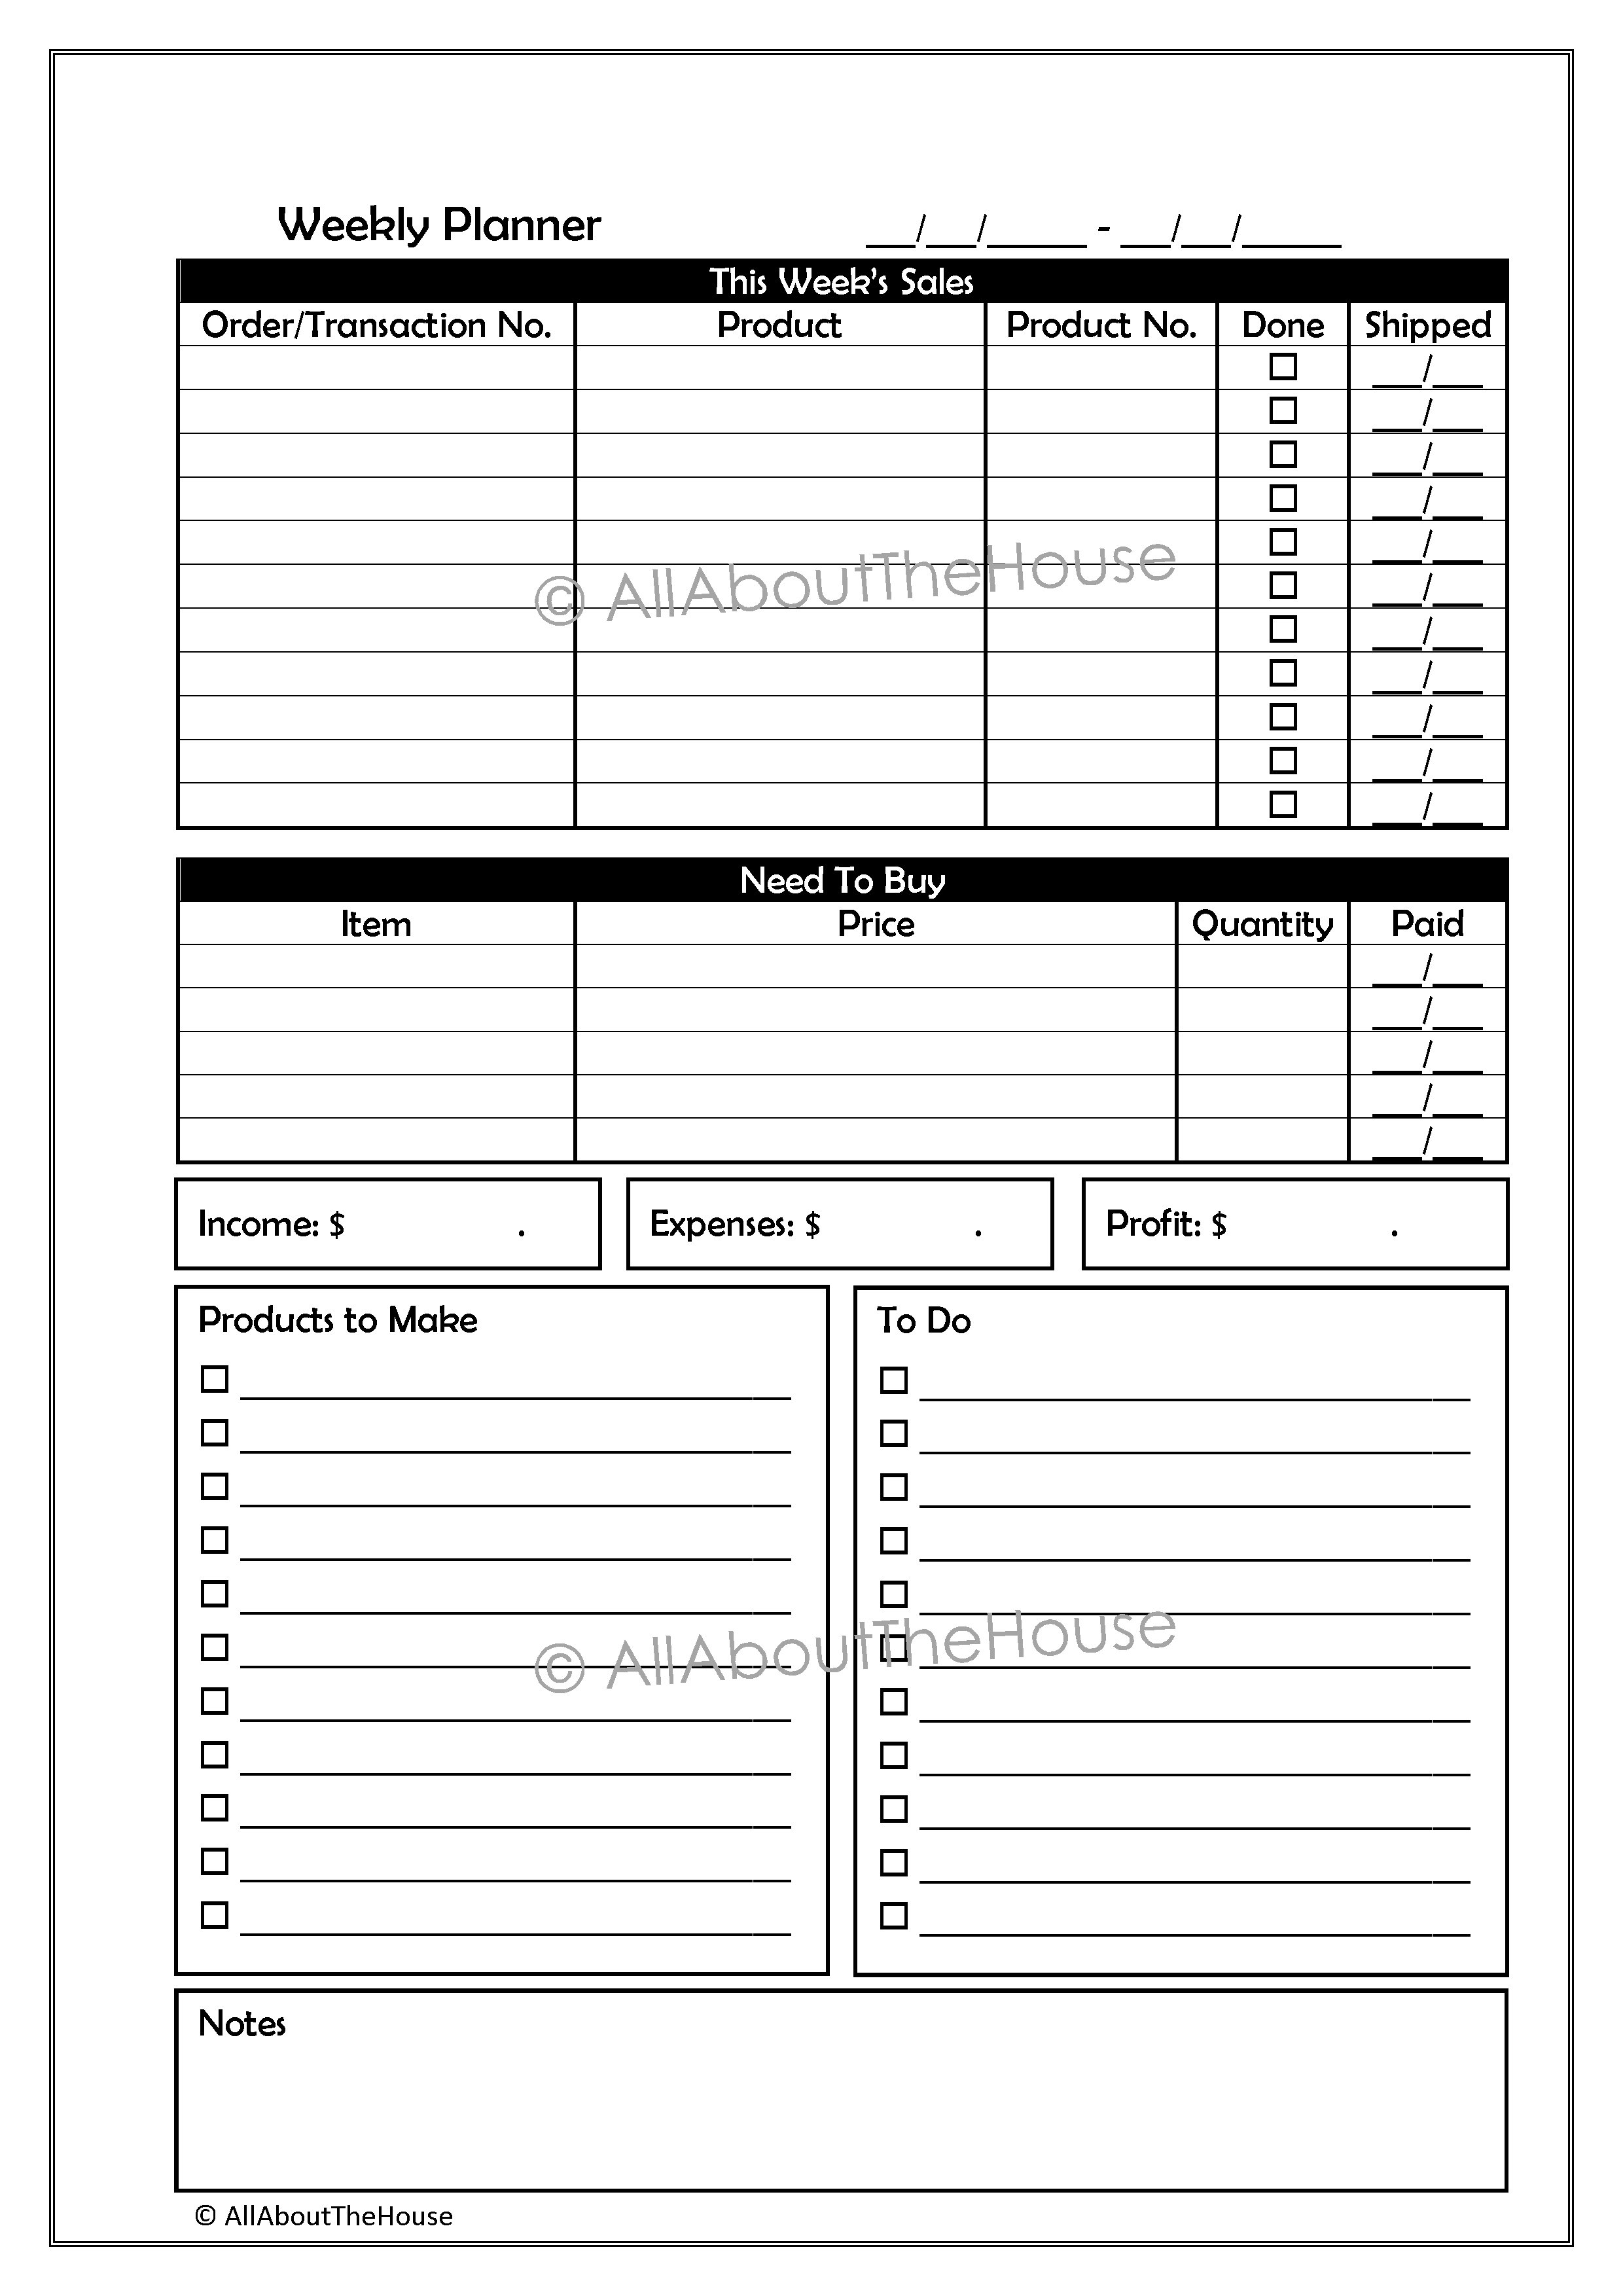 332. Weekly Work Planner - AllAboutTheHouse